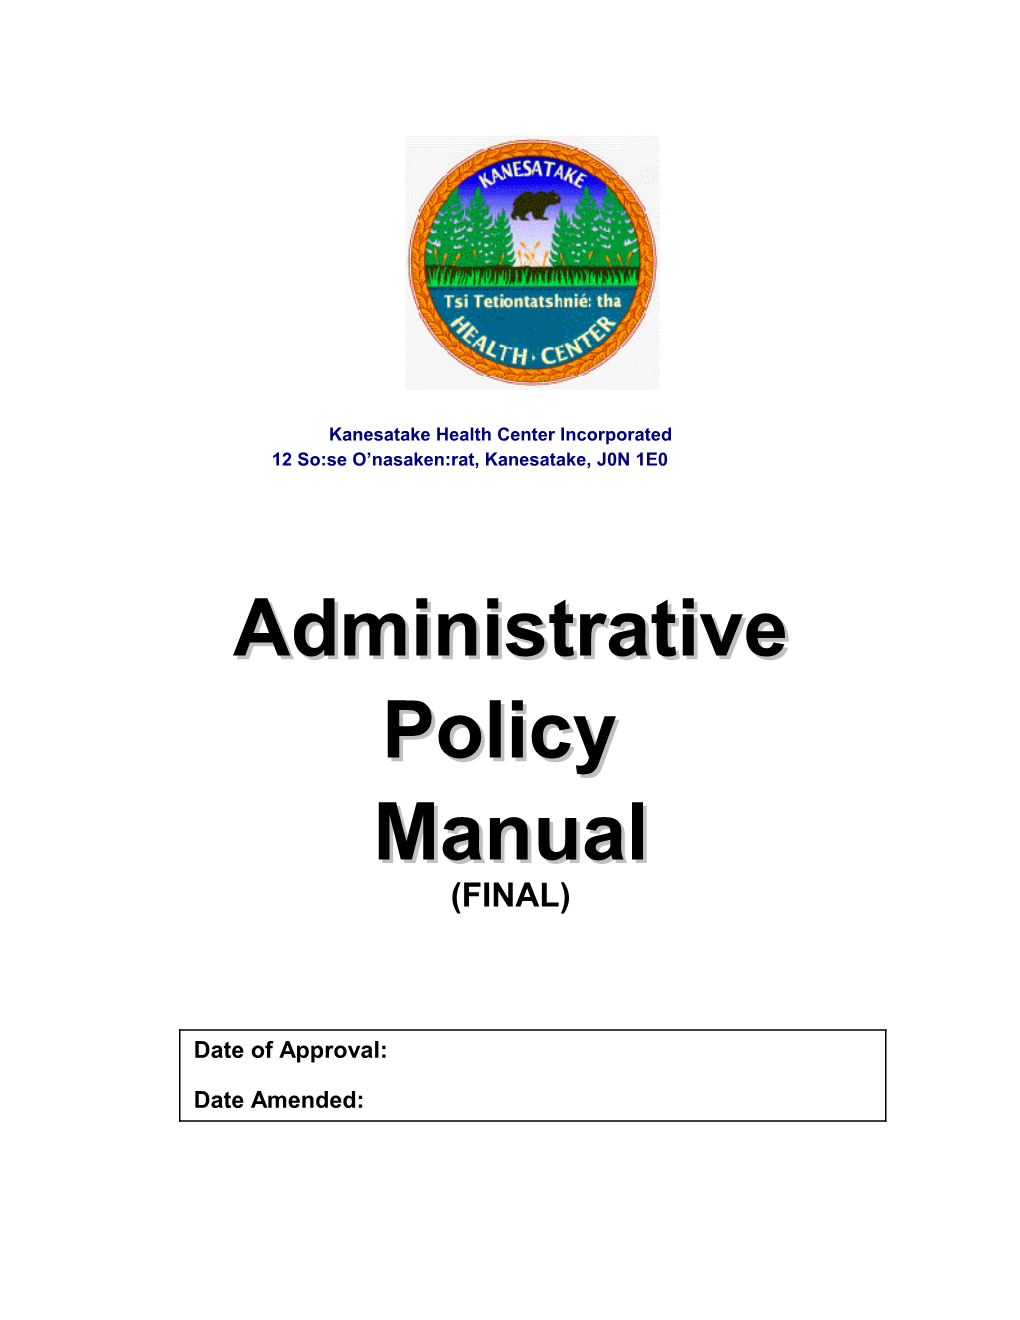 KHC Inc. Administrative Policy Manual